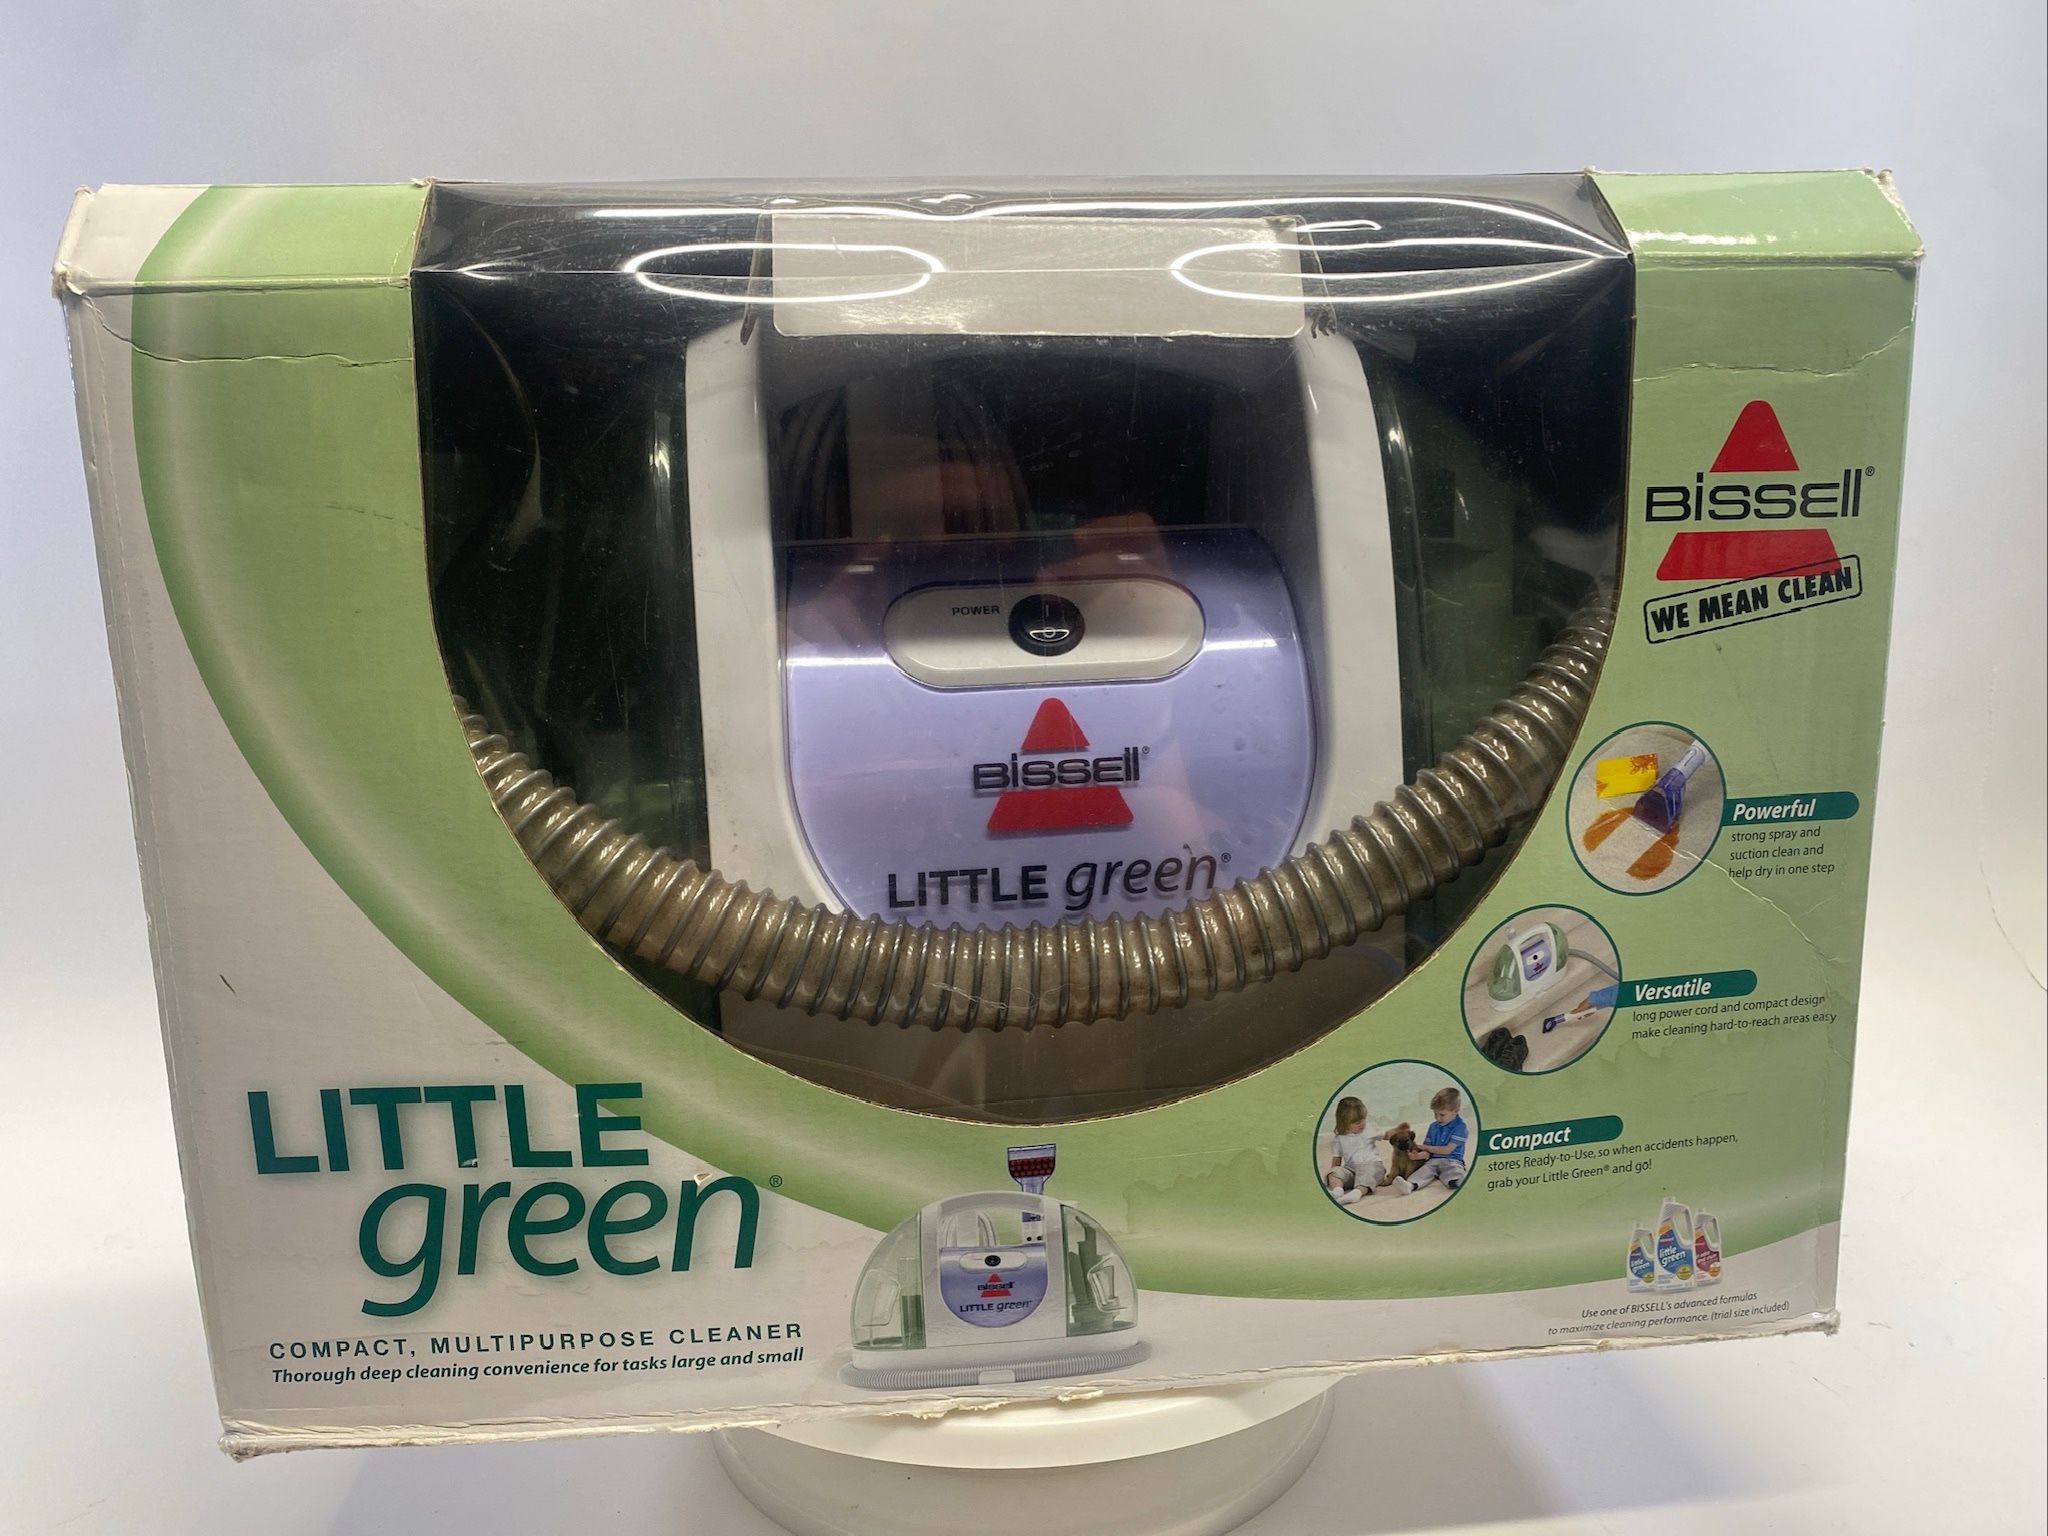 Bissell Little Green Multi-Purpose Portable Carpet & Upholstery Cleaner- 1400-5